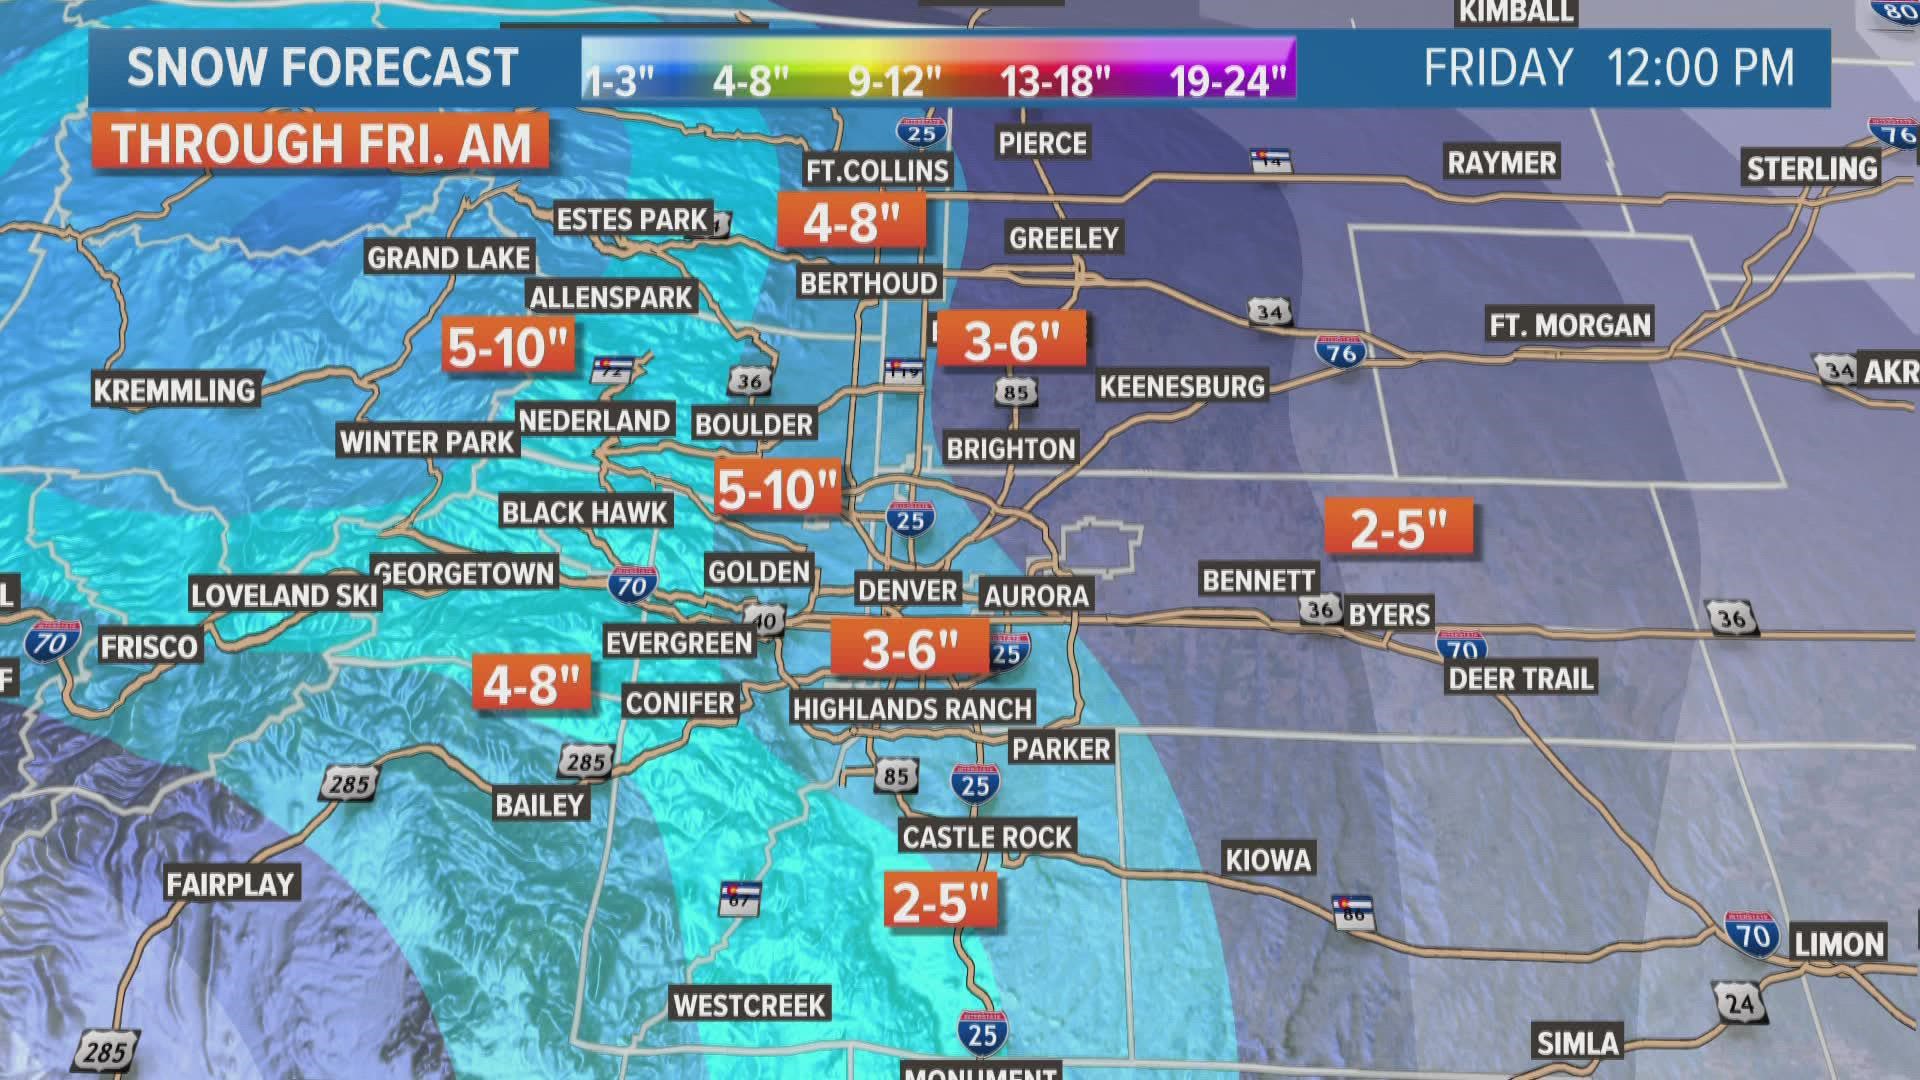 Heavier snow is expected to move into the Denver metro between 3p.m. and 6 p.m., likely making for a messing evening commute.